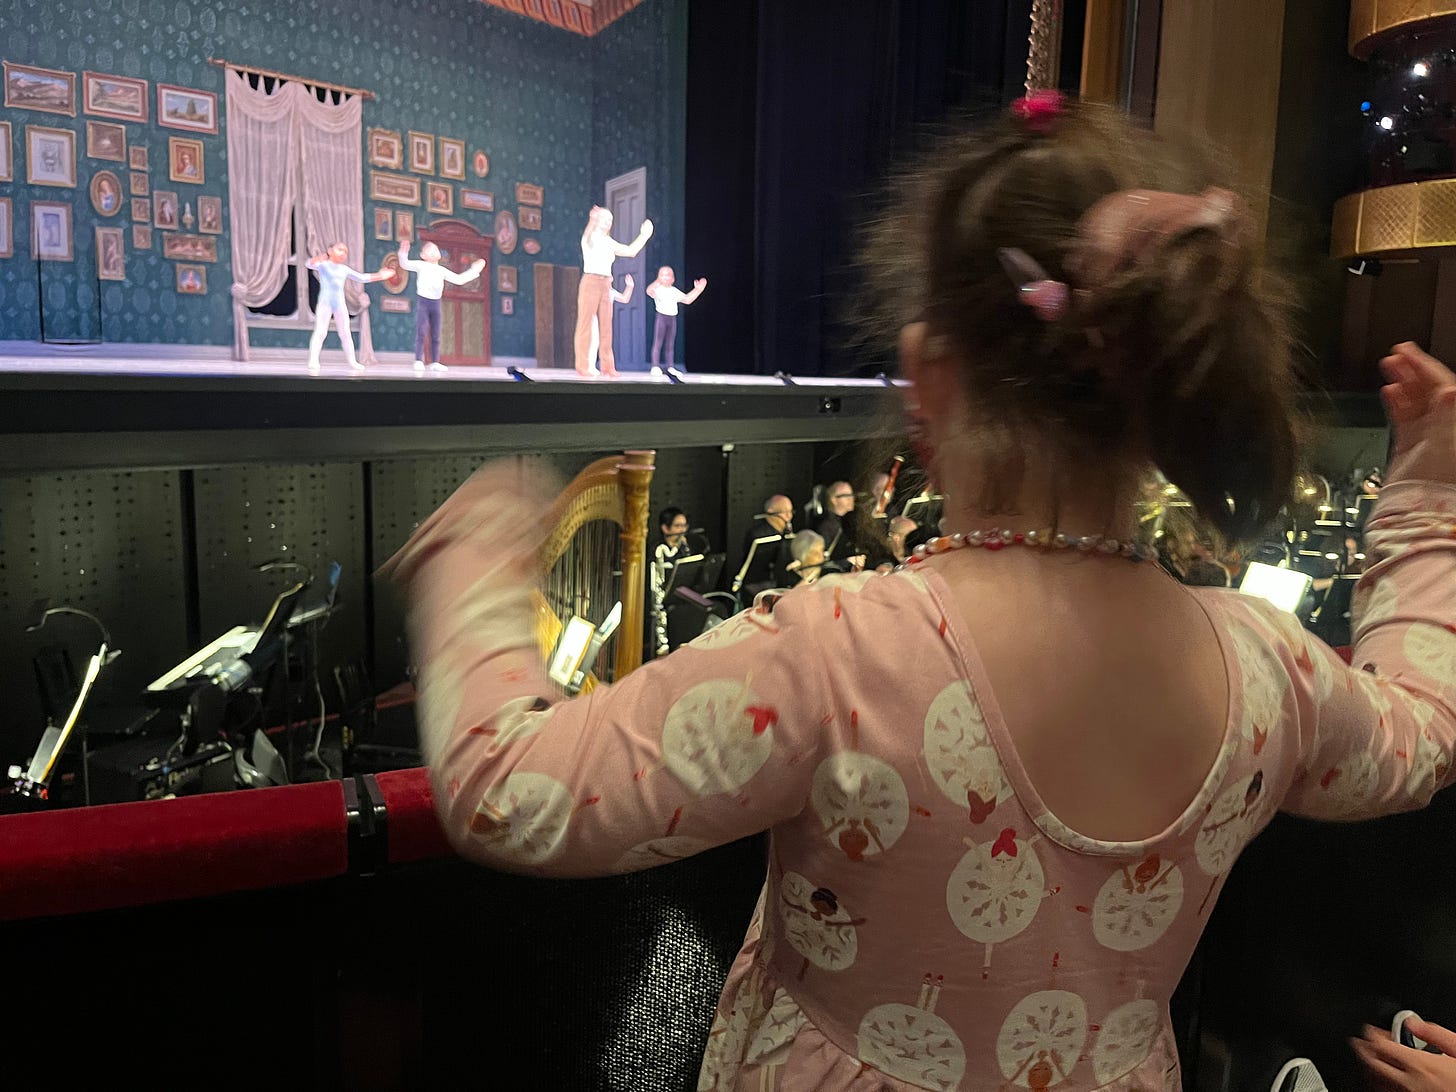 a six-year-old girl in a pink ballerina dress dancing in front of the orchestra pit at the New York State Theater